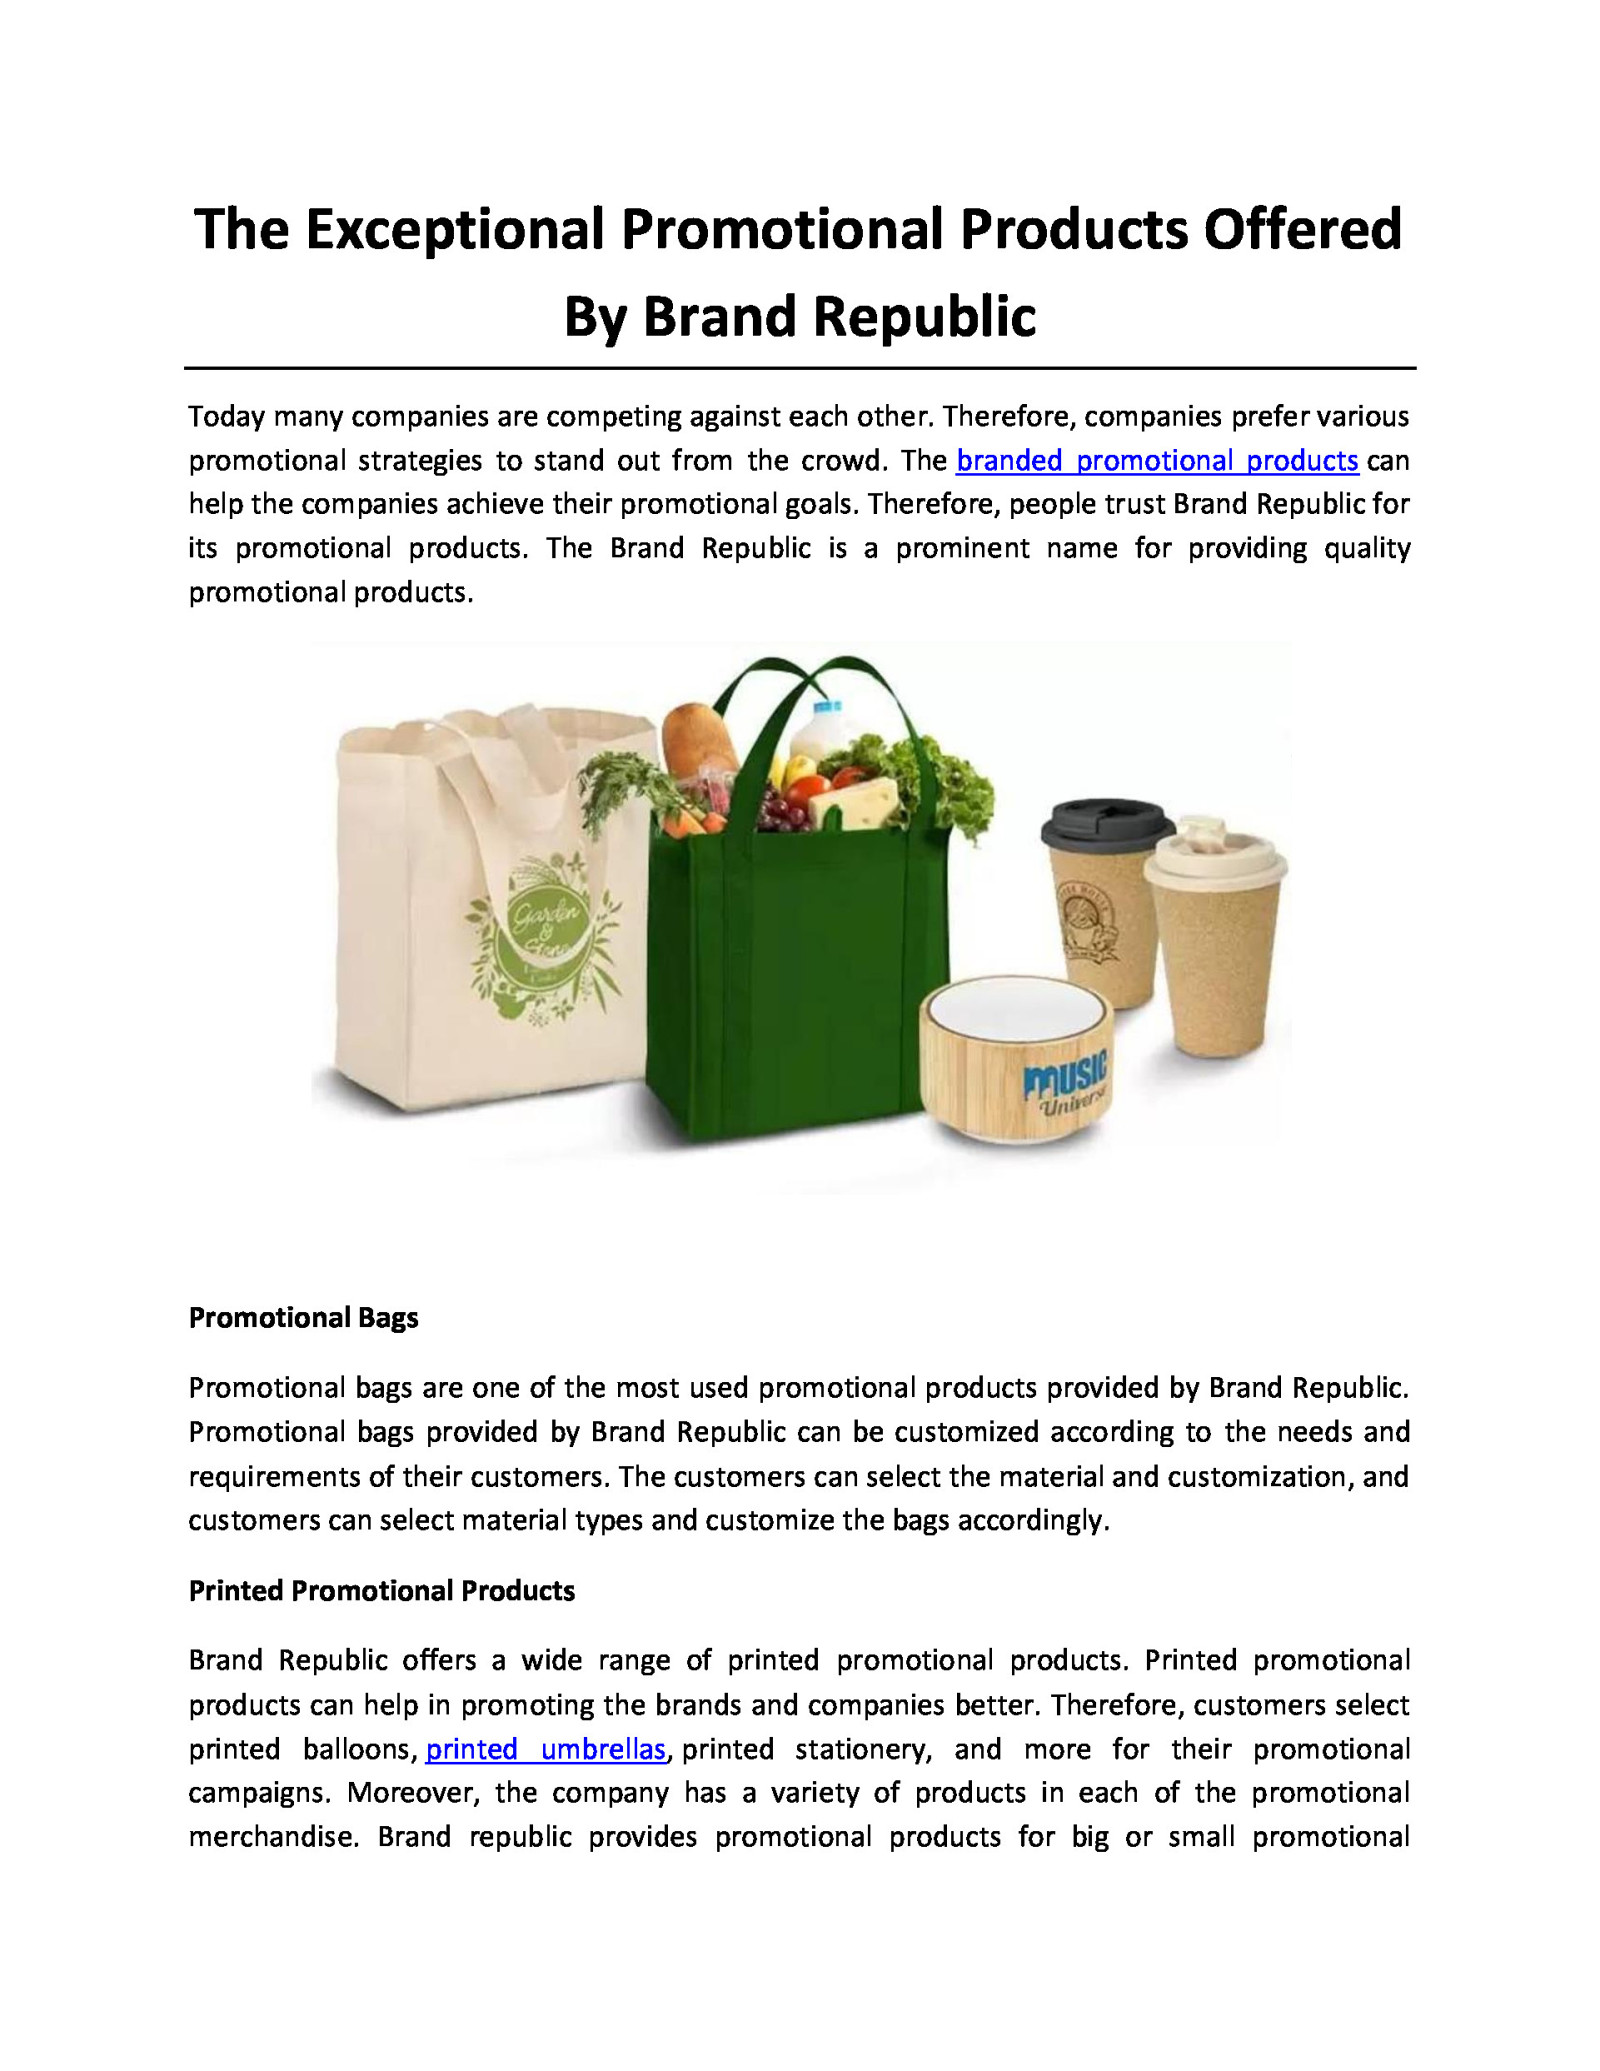 The Exceptional Promotional Products Offered By Brand Republic